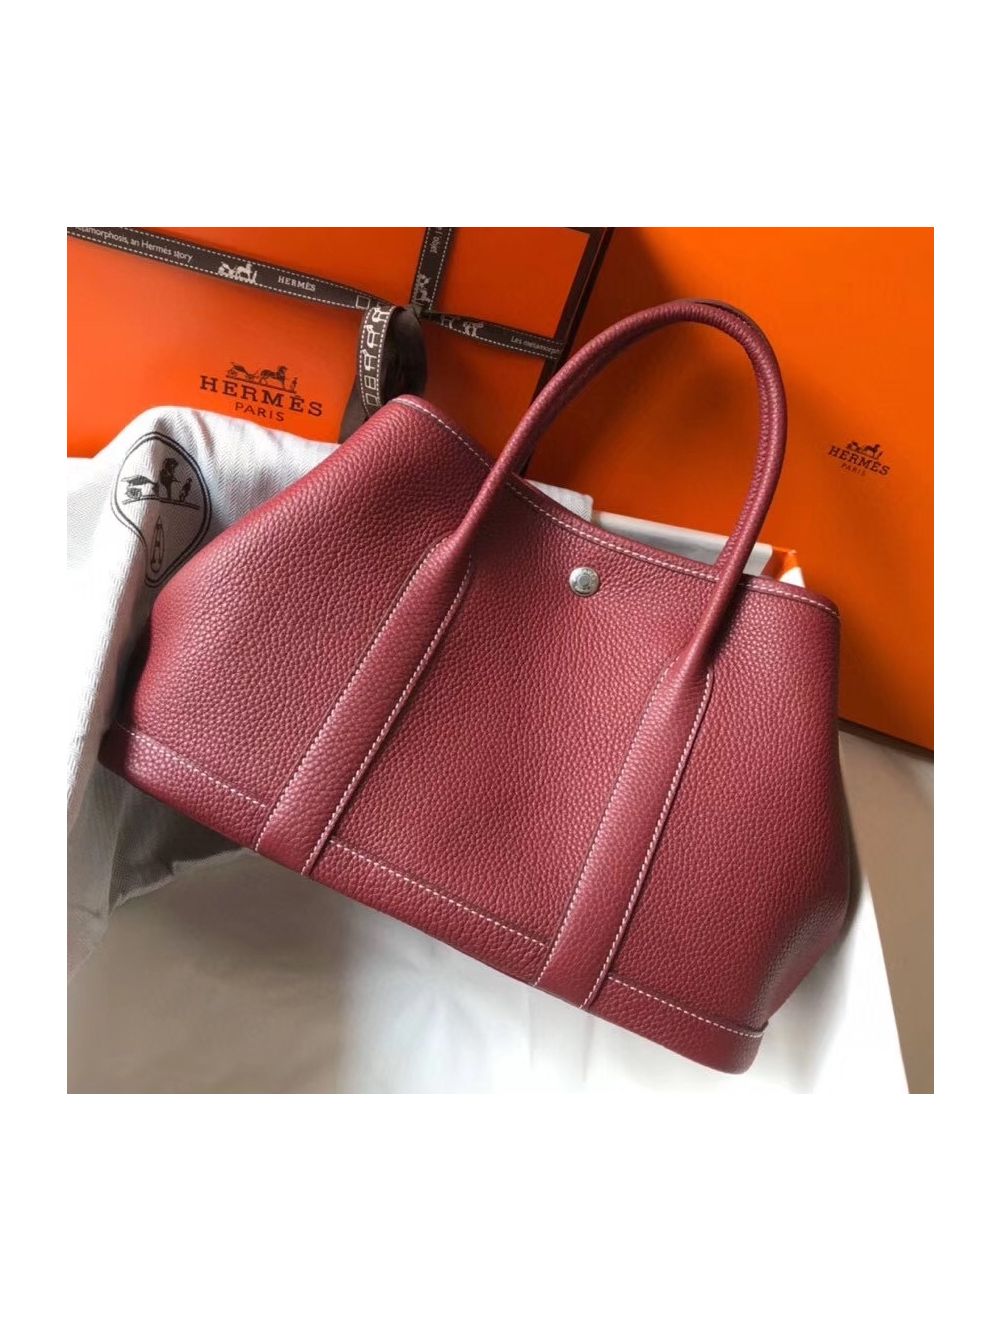 HERMES GARDEN PARTY vs EVELYNE - COMPARISION/REVIEW